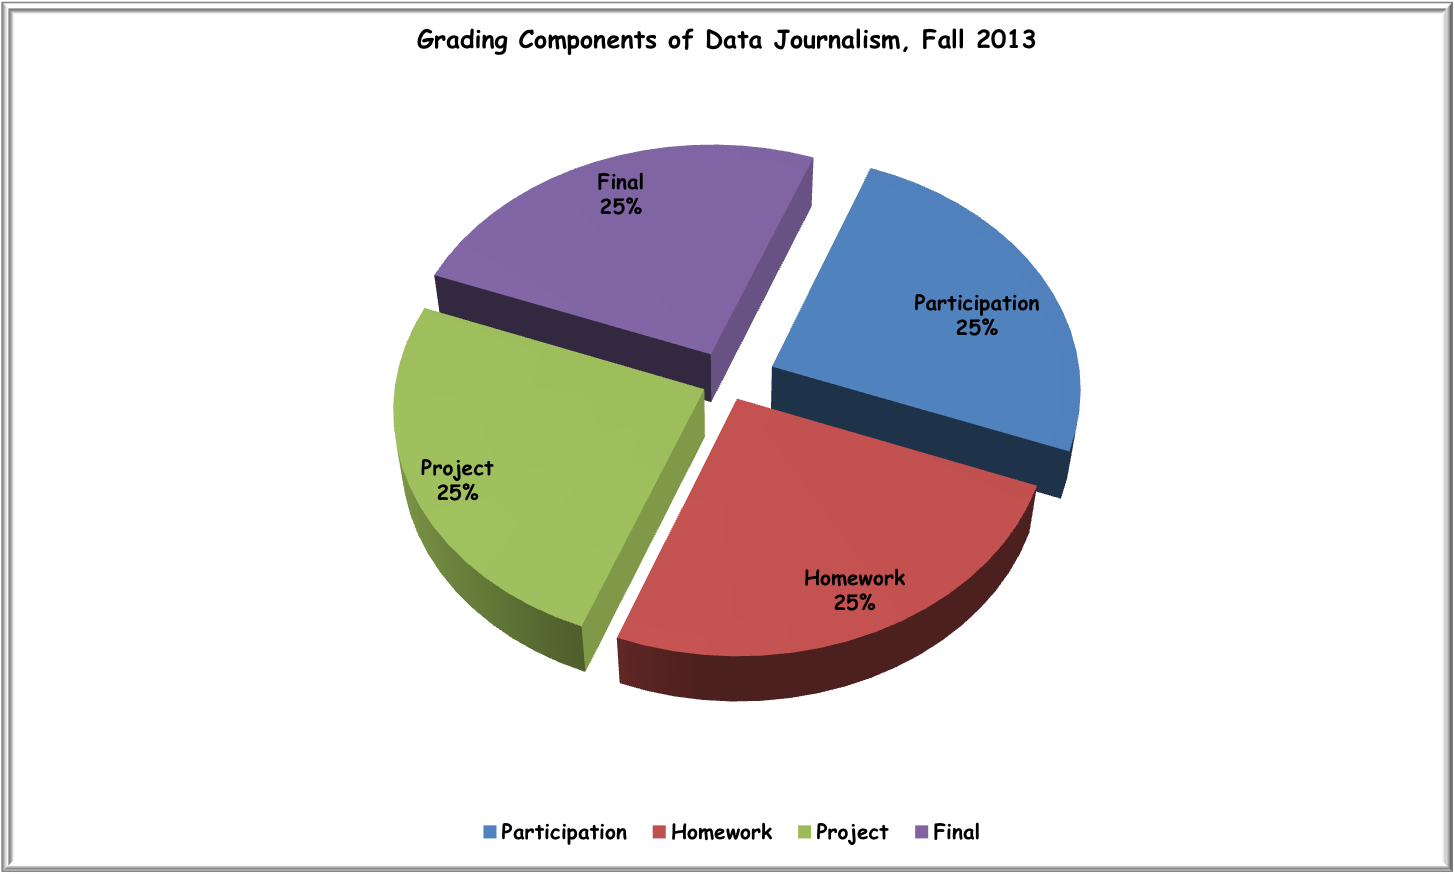 Grading components as a pie chart